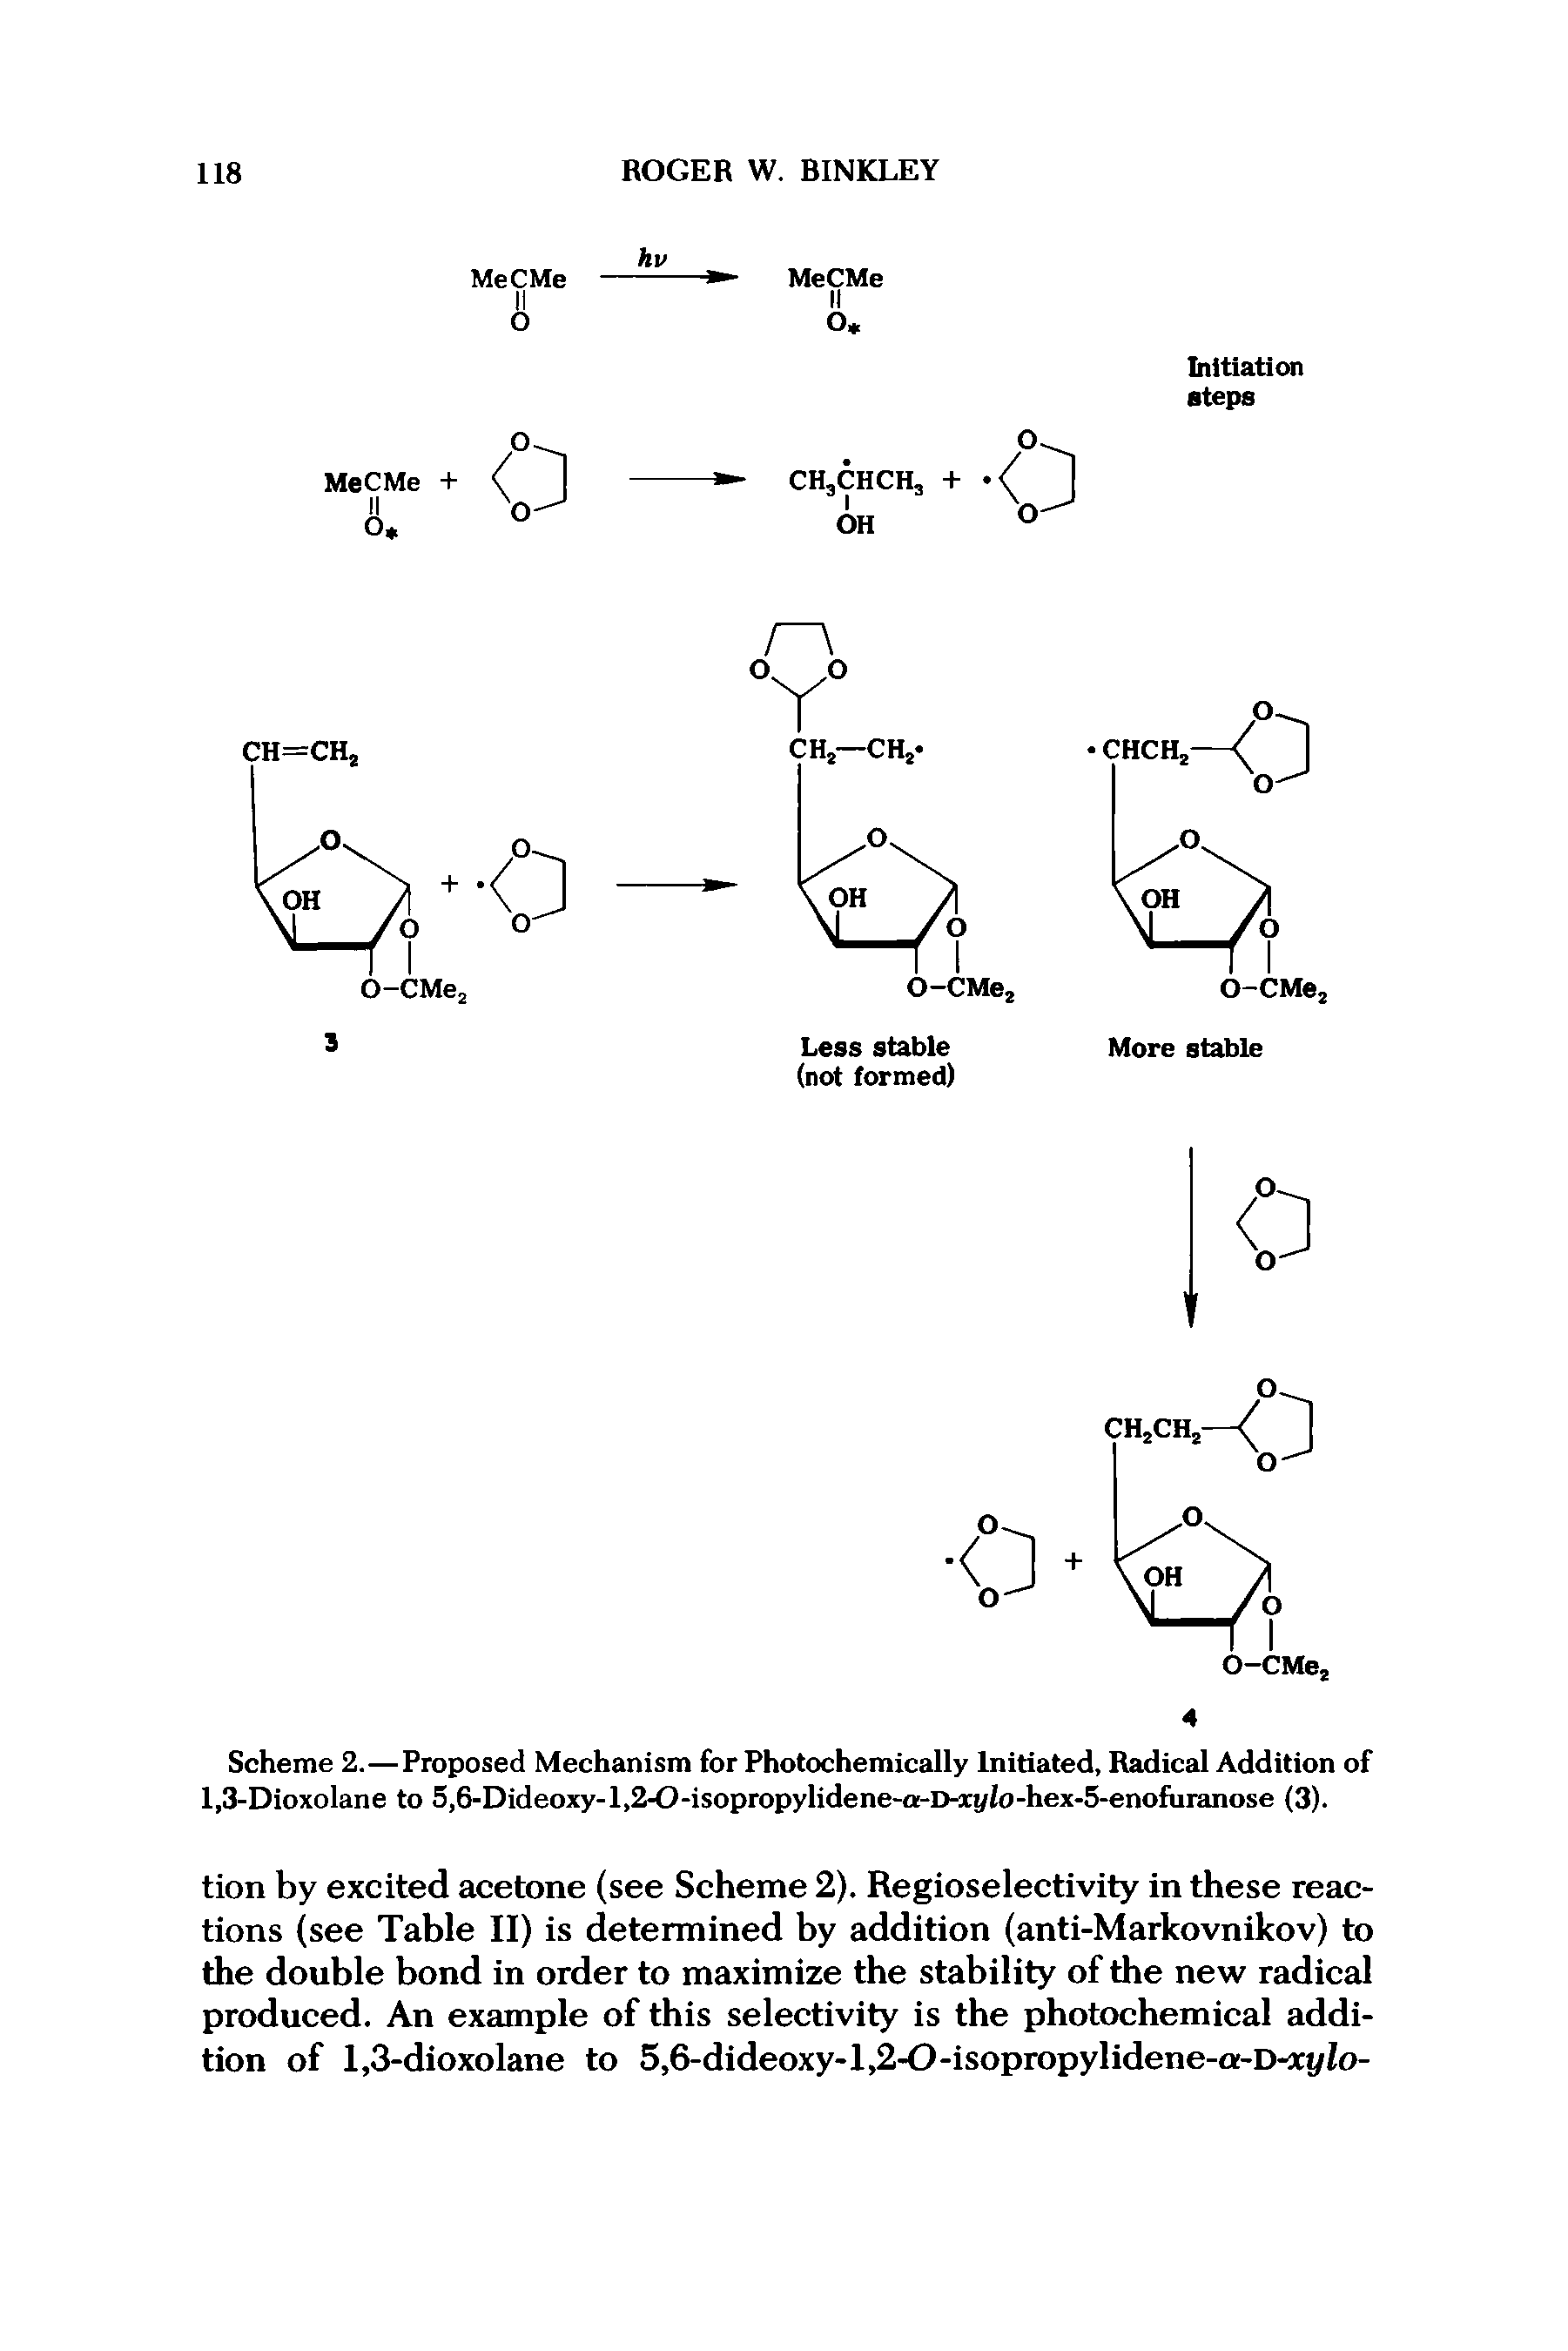 Scheme 2.—Proposed Mechanism for Photochemically Initiated, Radical Addition of 1,3-Dioxolane to 5,6-Dideoxy-l,2-0-isopropylidene-a-D-xi//o-hex-5-enofuranose (3).